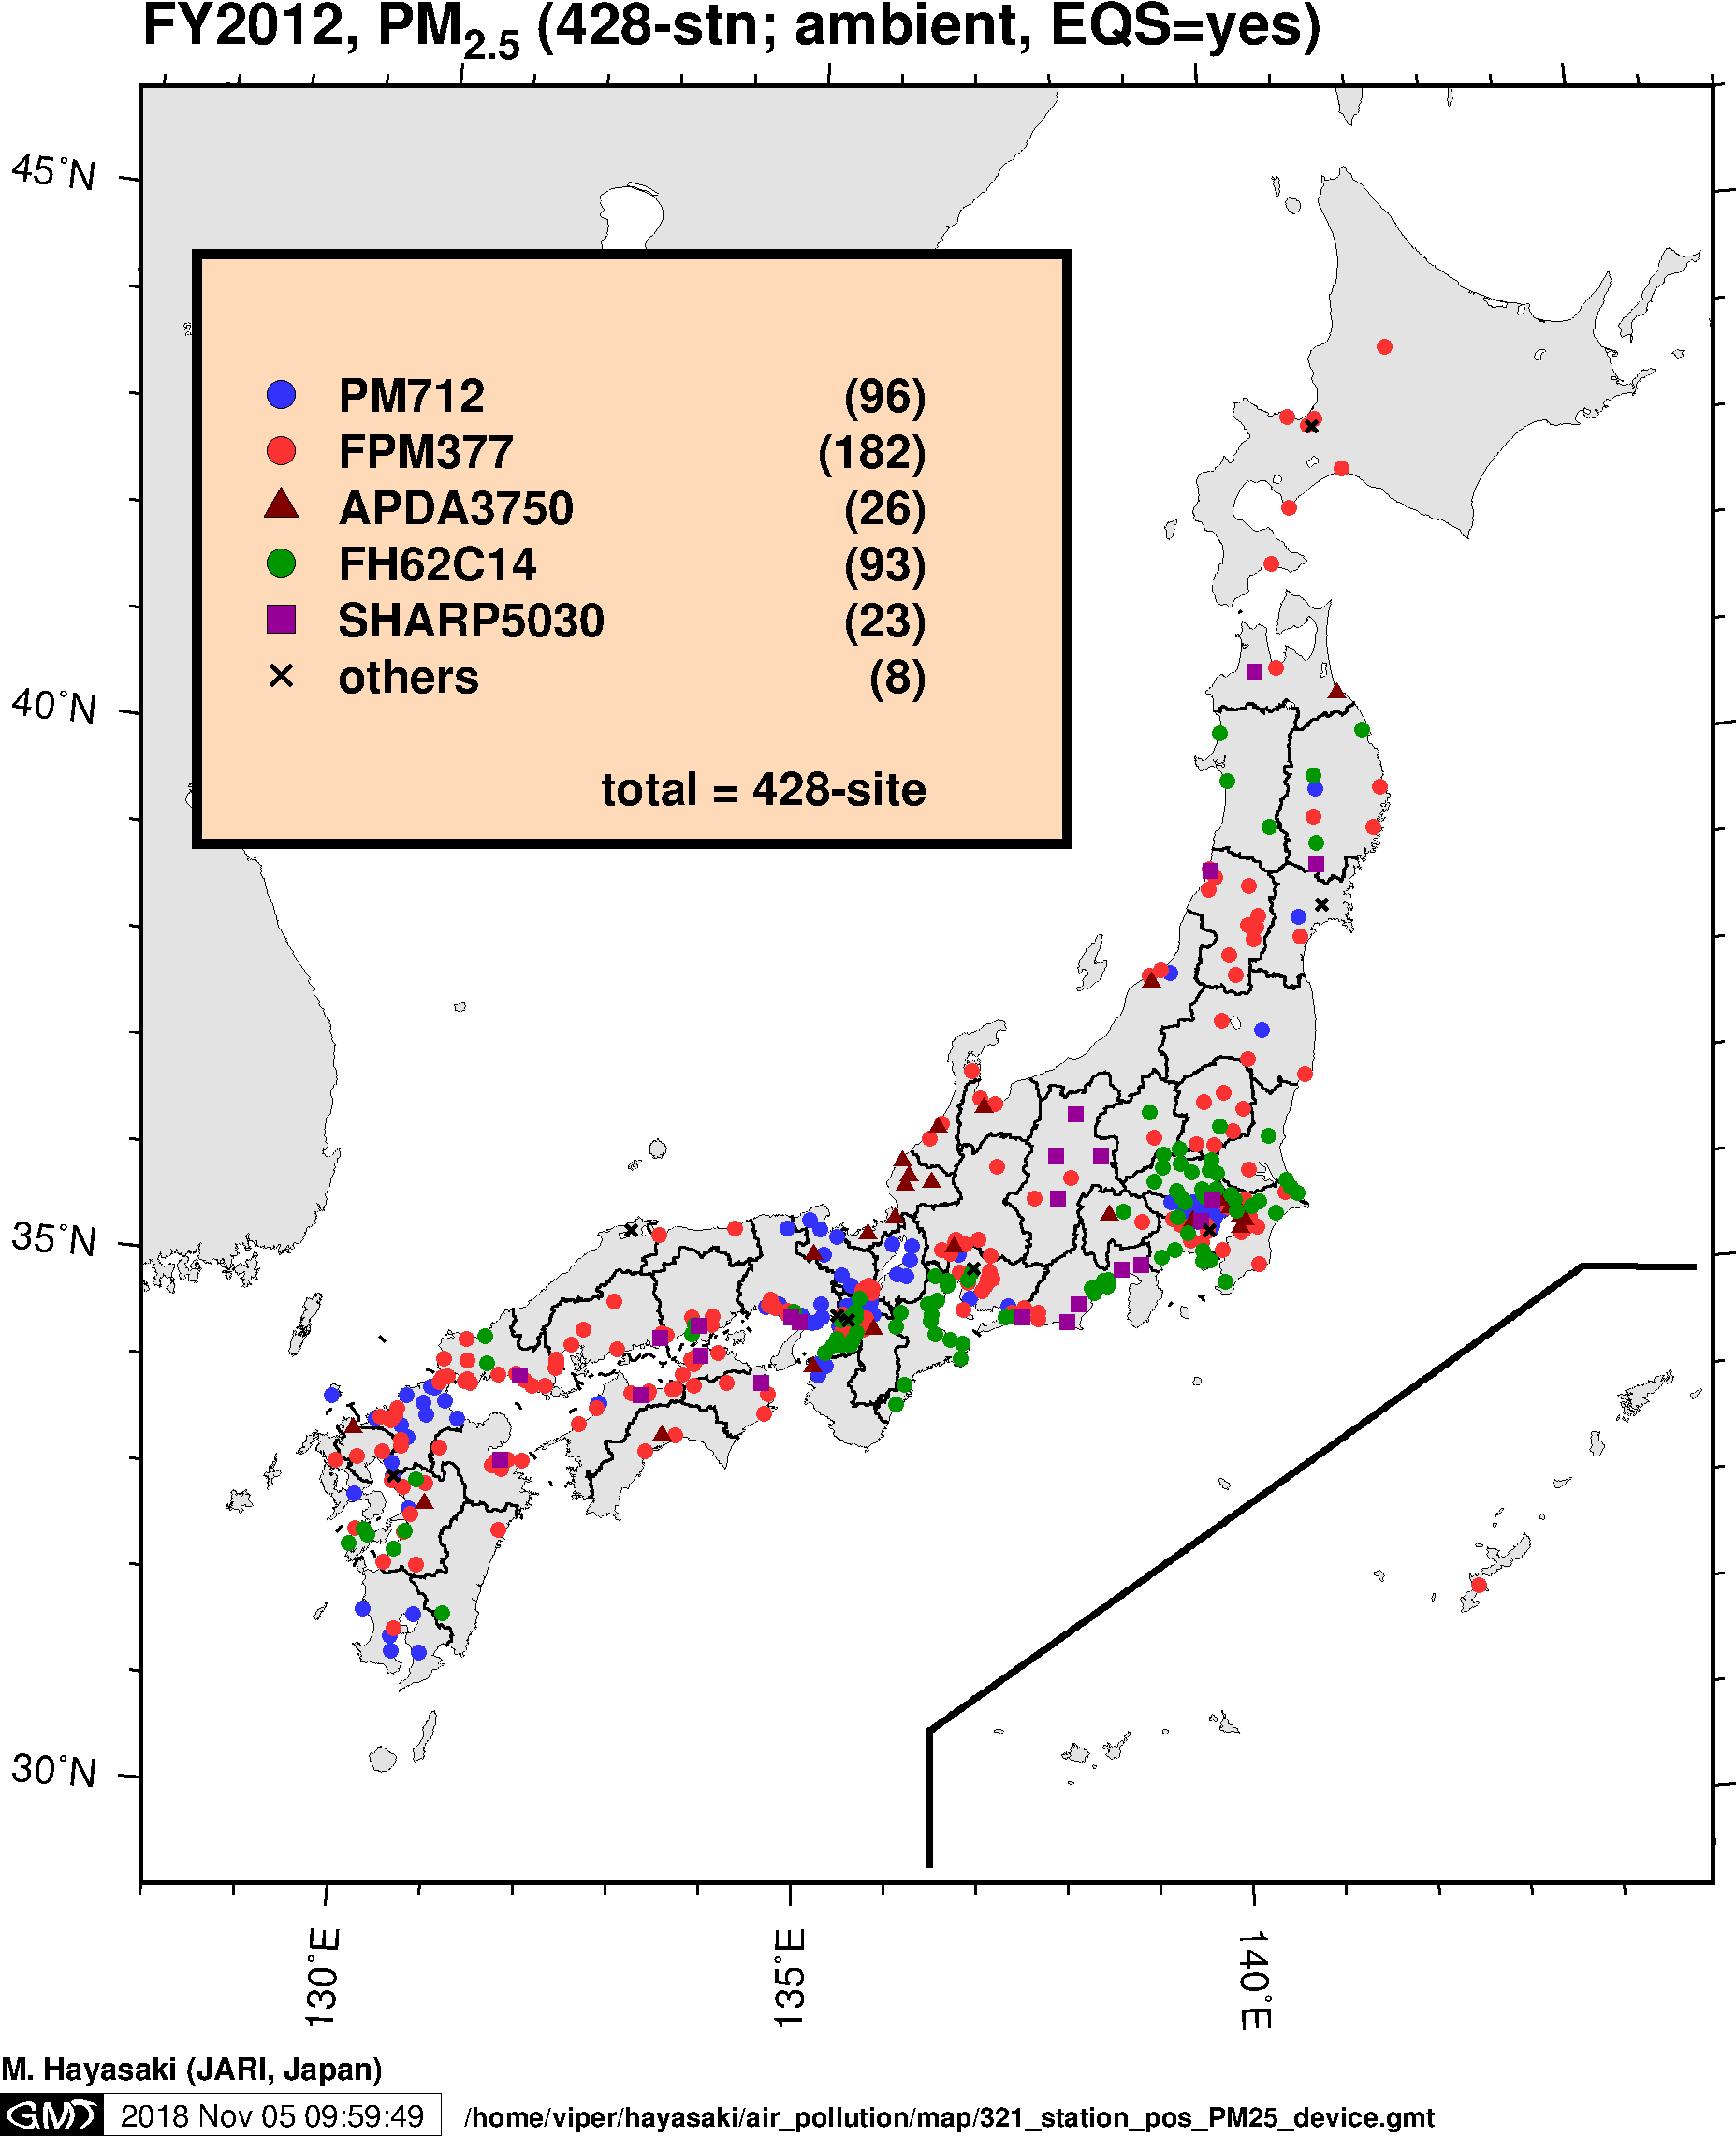 PM2.5 Monitoring devices in Japan (FY2012)